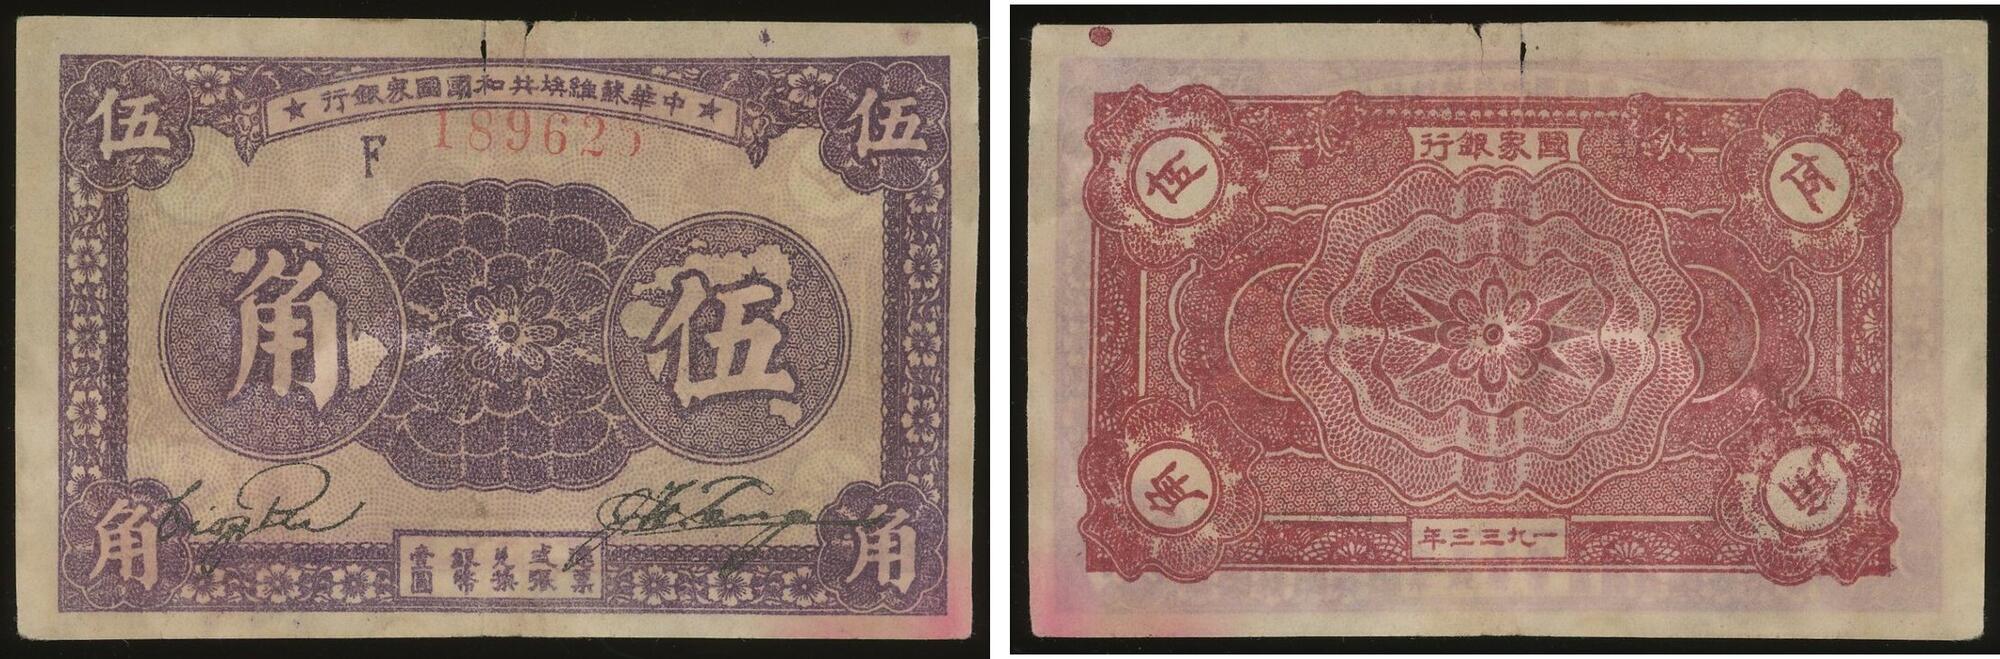 NumisBids: Spink Auction CSS70A (7 Nov 2021): Chinese Banknotes